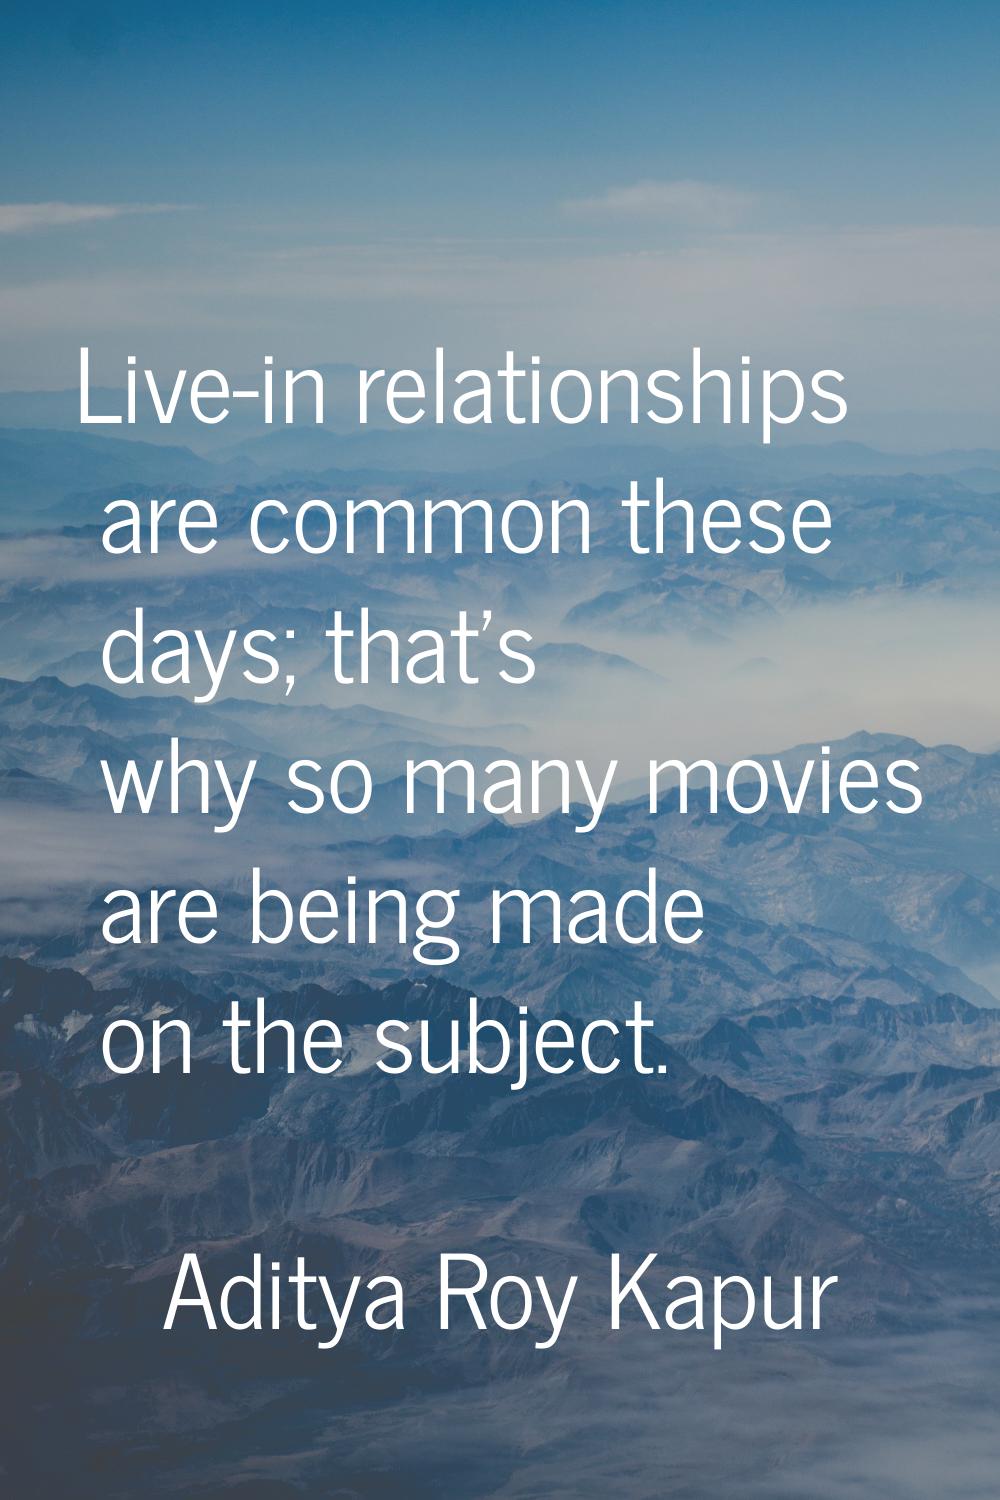 Live-in relationships are common these days; that's why so many movies are being made on the subjec